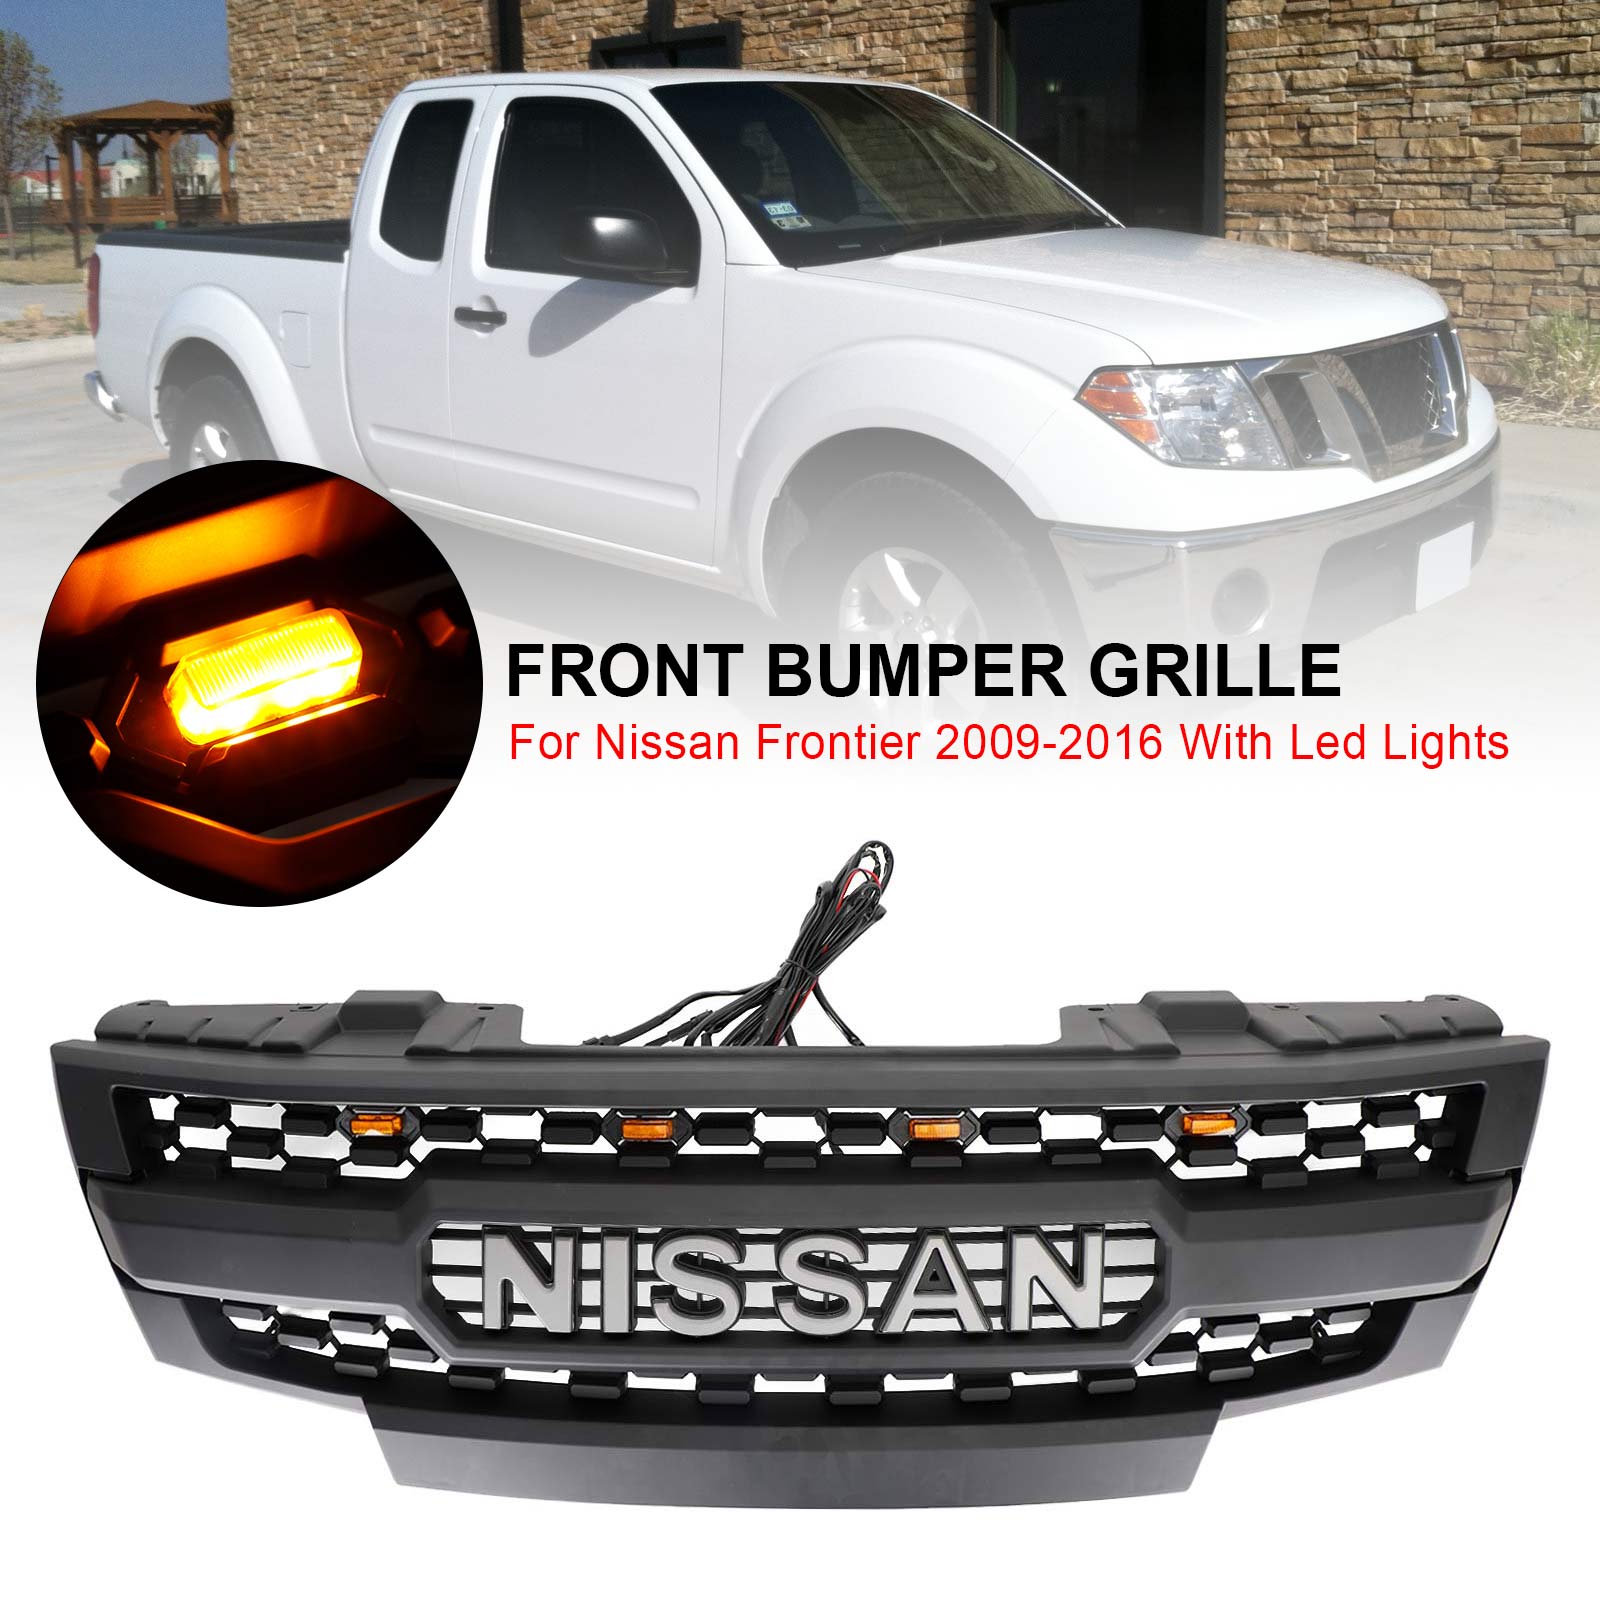 Dropship Front Grill Bumper Grille Fit For NISSAN FRONTIER 2009-2016 With  Amber Light to Sell Online at a Lower Price